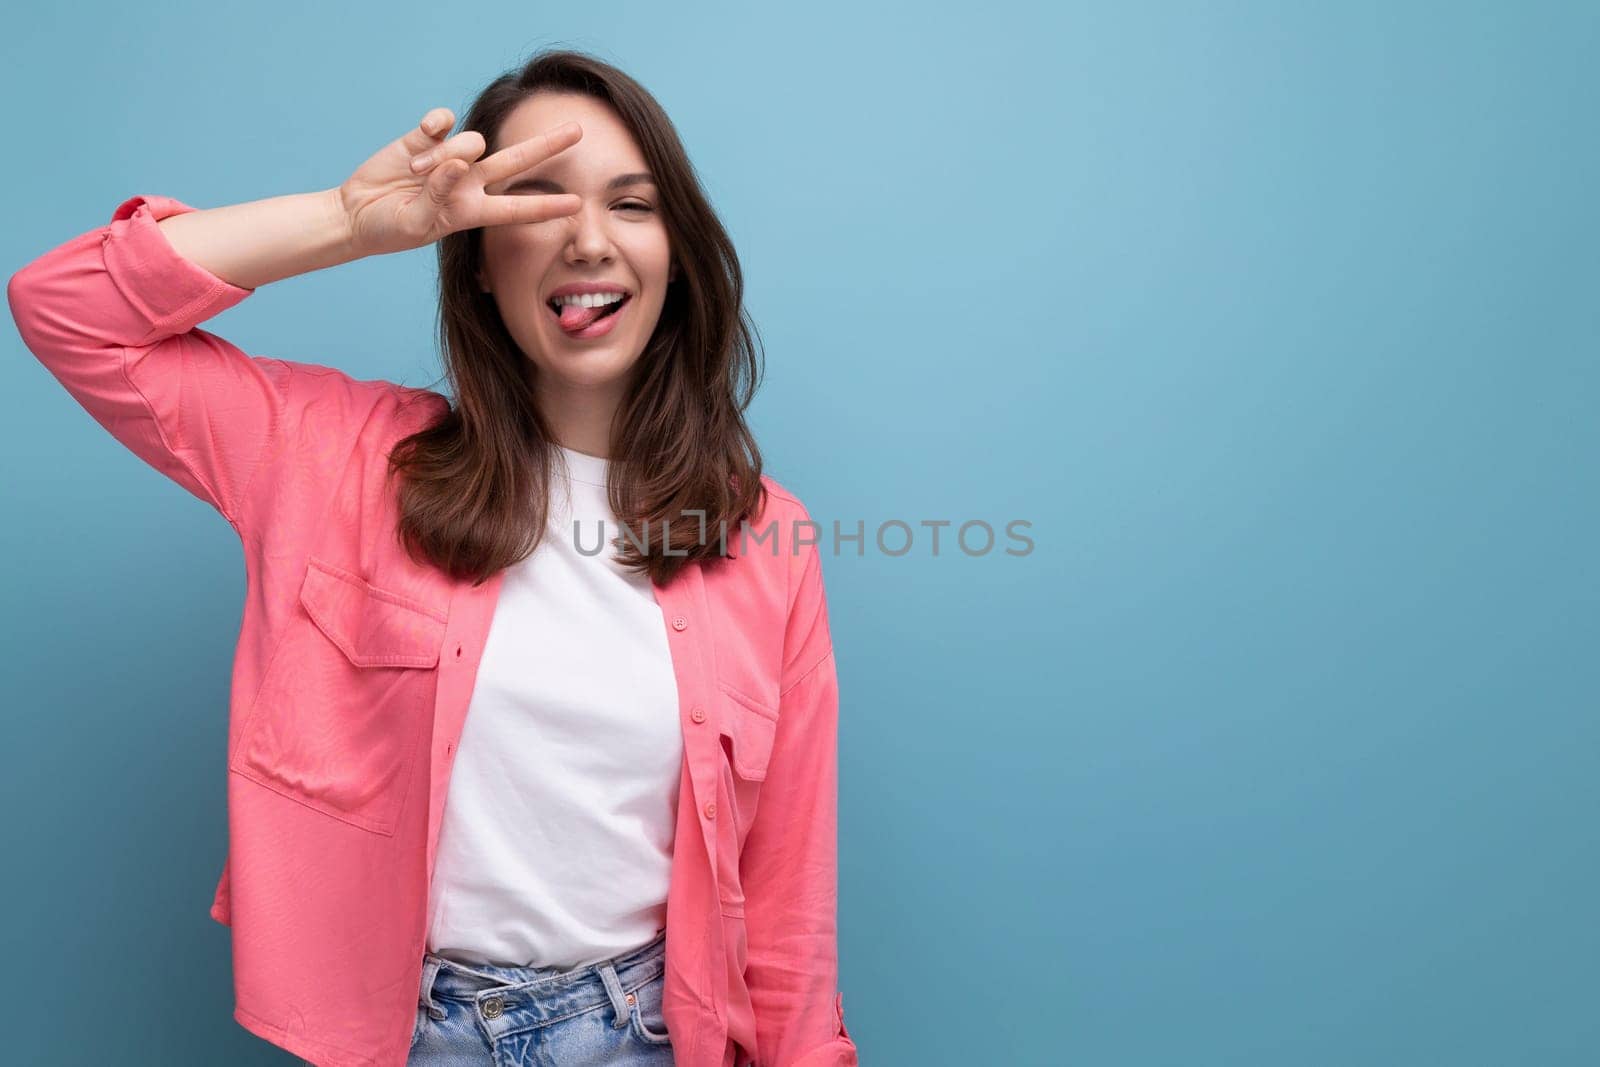 optimist young lady in shirt and jeans on studio isolated background.